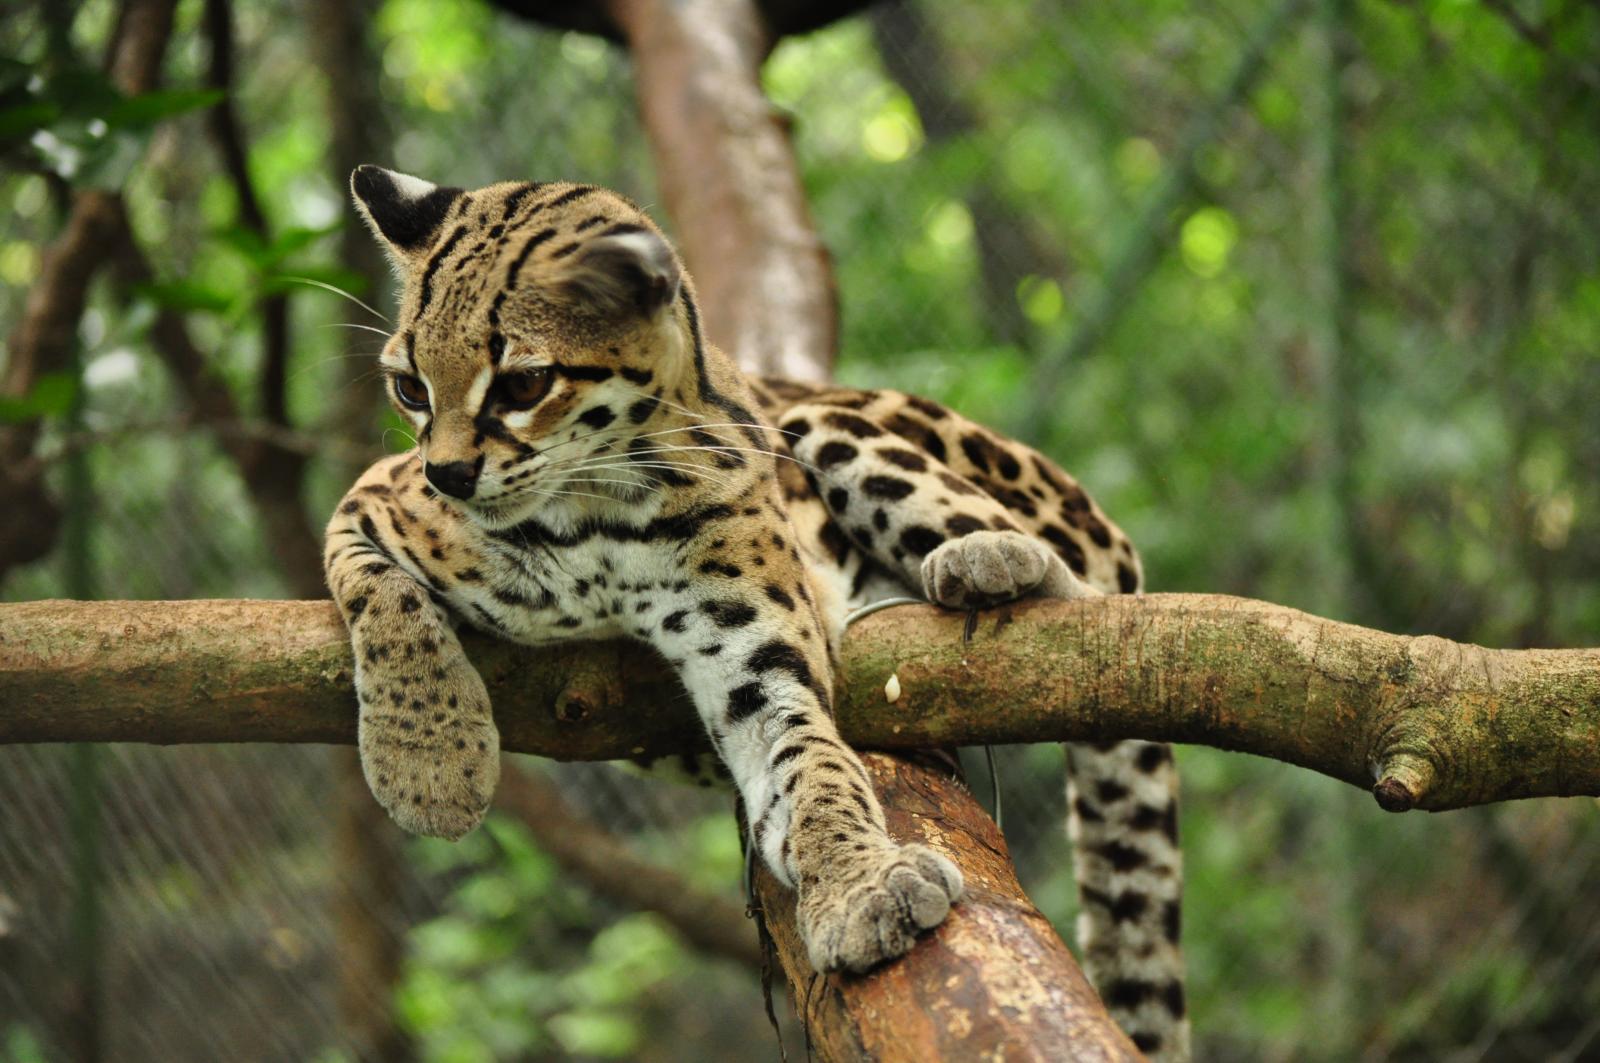 Animal Galleries, picture of animals from around the world. Wild Cats. Margay Photo Gallery. Margay Cat Photo relax tree